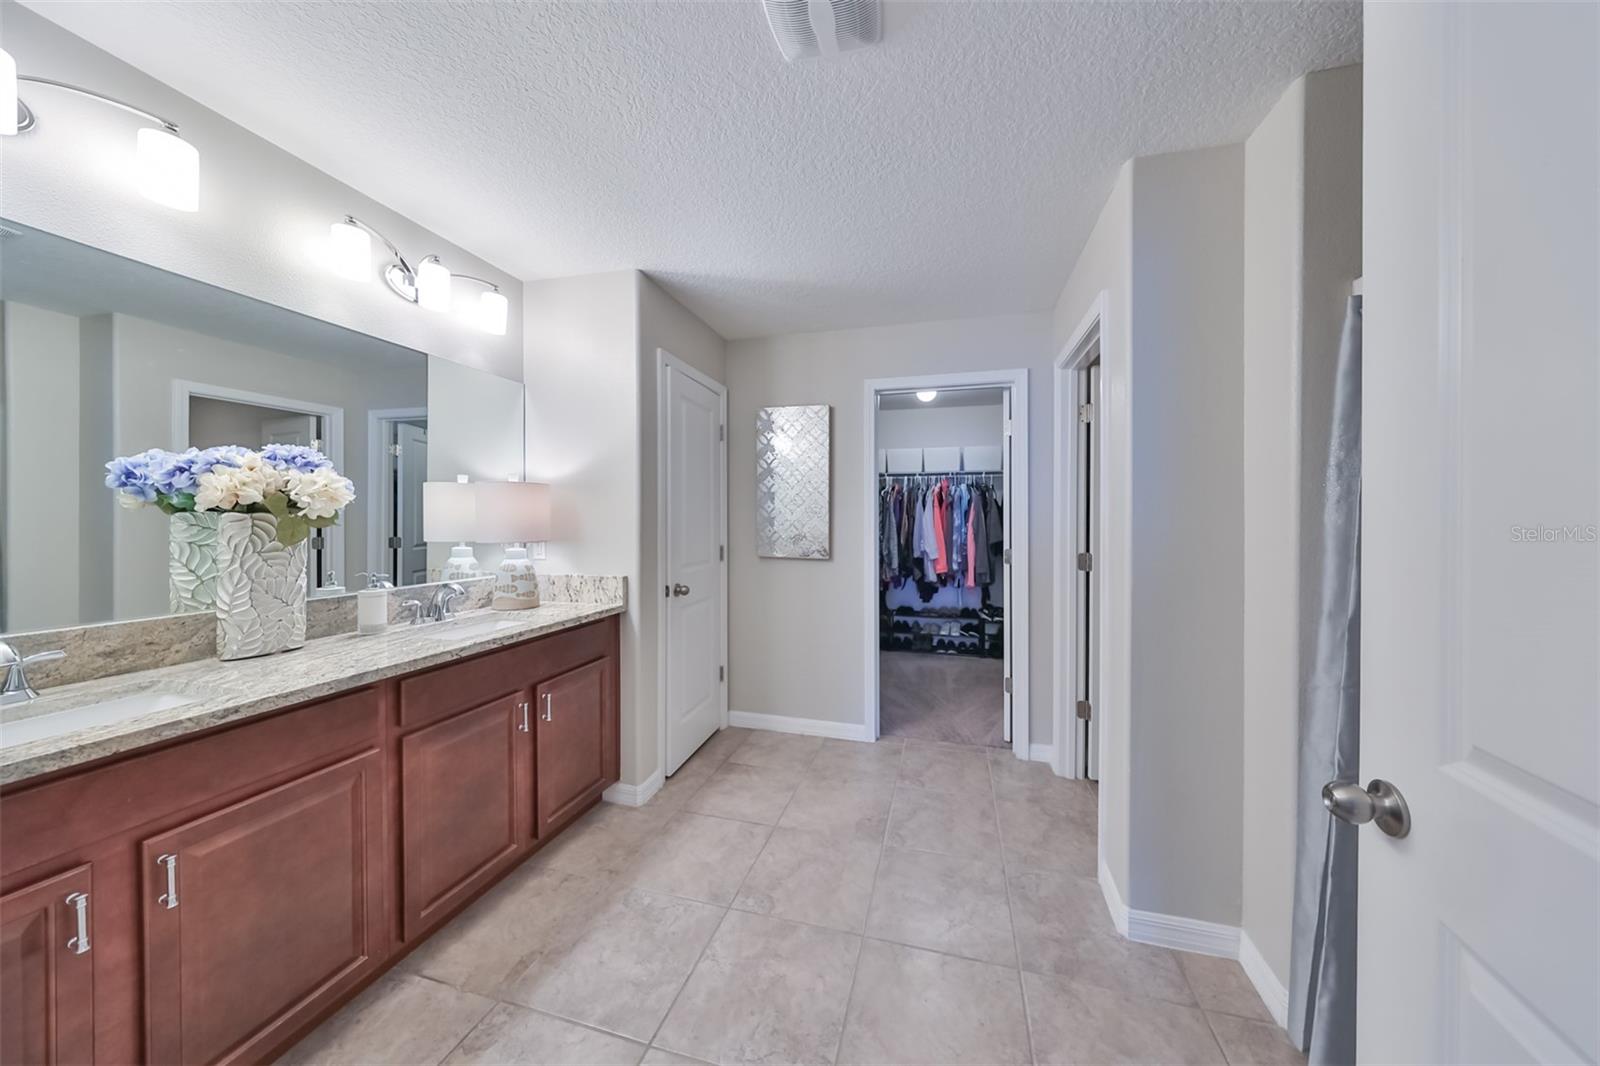 Large en-suite bathroom with walk-in closet, granite counters, private water closet and dual sinks is bright and inviting.